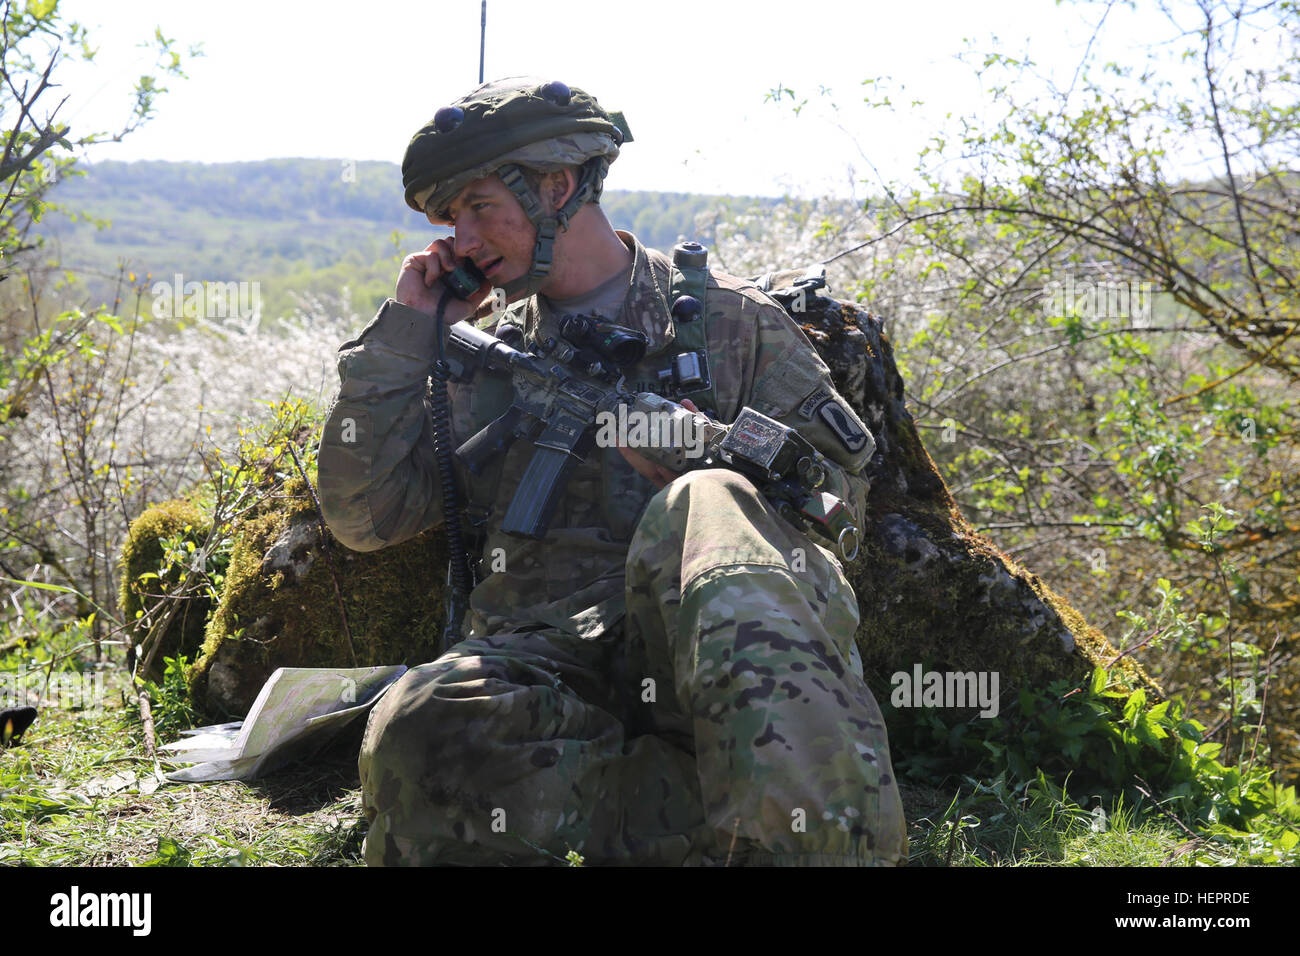 U.S. Army Spc. Daniel Fethiere of 1st Squadron, 91st Cavalry Regiment, 173rd Airborne Brigade transmits a situational report while conducting a reconnaissance training mission during exercise Saber Junction 16 at the U.S. Army’s Joint Multinational Readiness Center (JMRC) in Hohenfels, Germany, April 20, 2016. Saber Junction 16 is the U.S. Army Europe’s 173rd Airborne Brigade’s combat training center certification exercise, taking place at the JMRC in Hohenfels, Germany, Mar. 31-Apr. 24, 2016.  The exercise is designed to evaluate the readiness of the Army’s Europe-based combat brigades to con Stock Photo